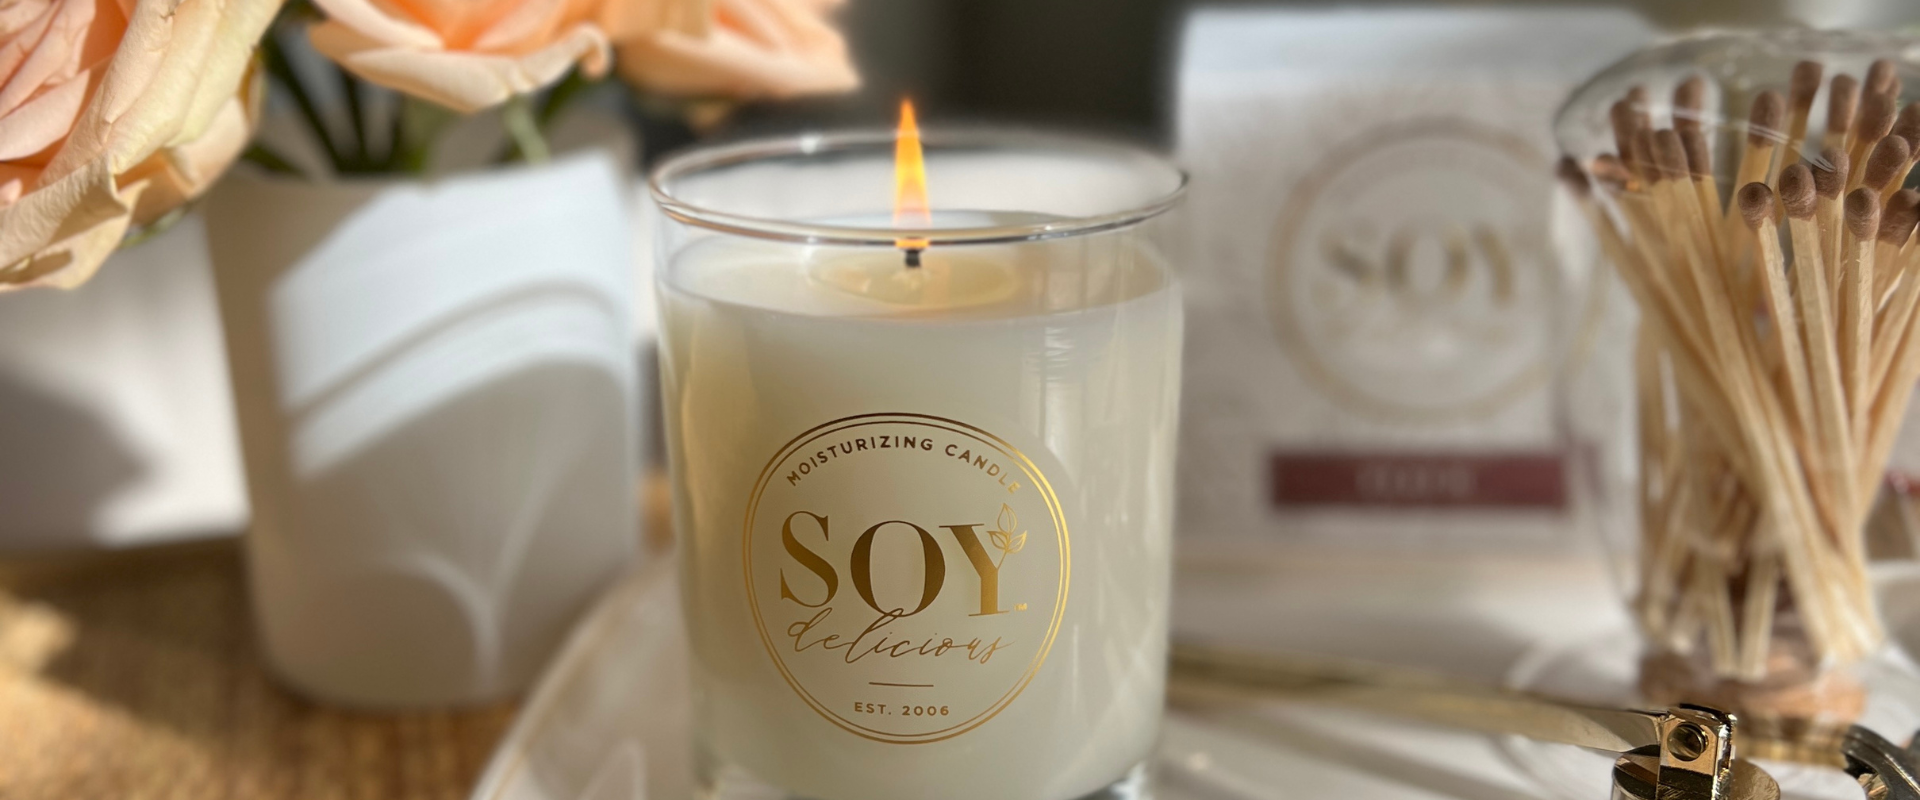 How To Store Your Candles To Get Long-Lasting Fragrance & Quality – Soy  Delicious Candles